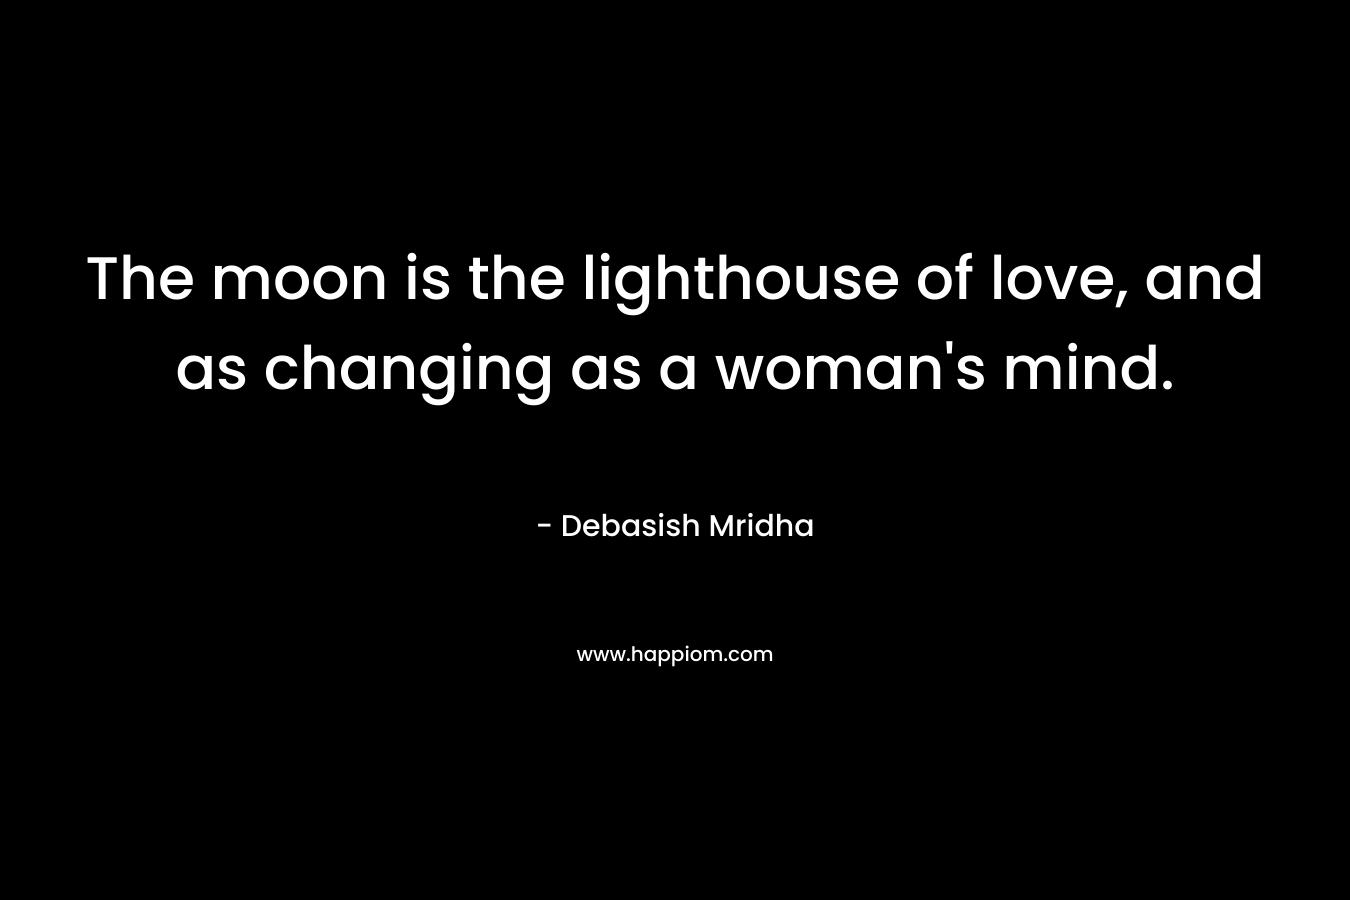 The moon is the lighthouse of love, and as changing as a woman’s mind. – Debasish Mridha